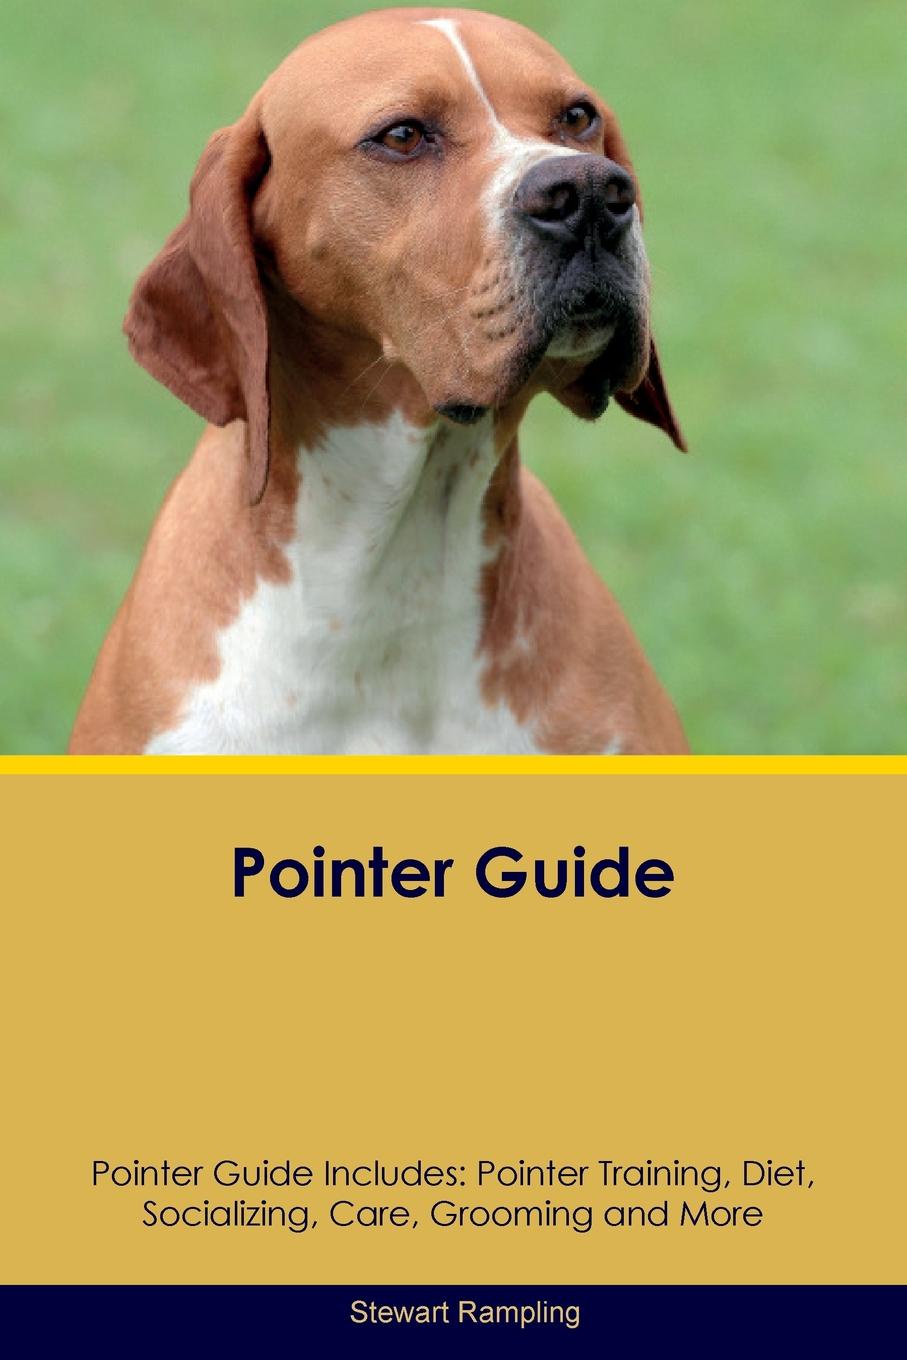 Pointer Guide Pointer Guide Includes. Pointer Training, Diet, Socializing, Care, Grooming, Breeding and More